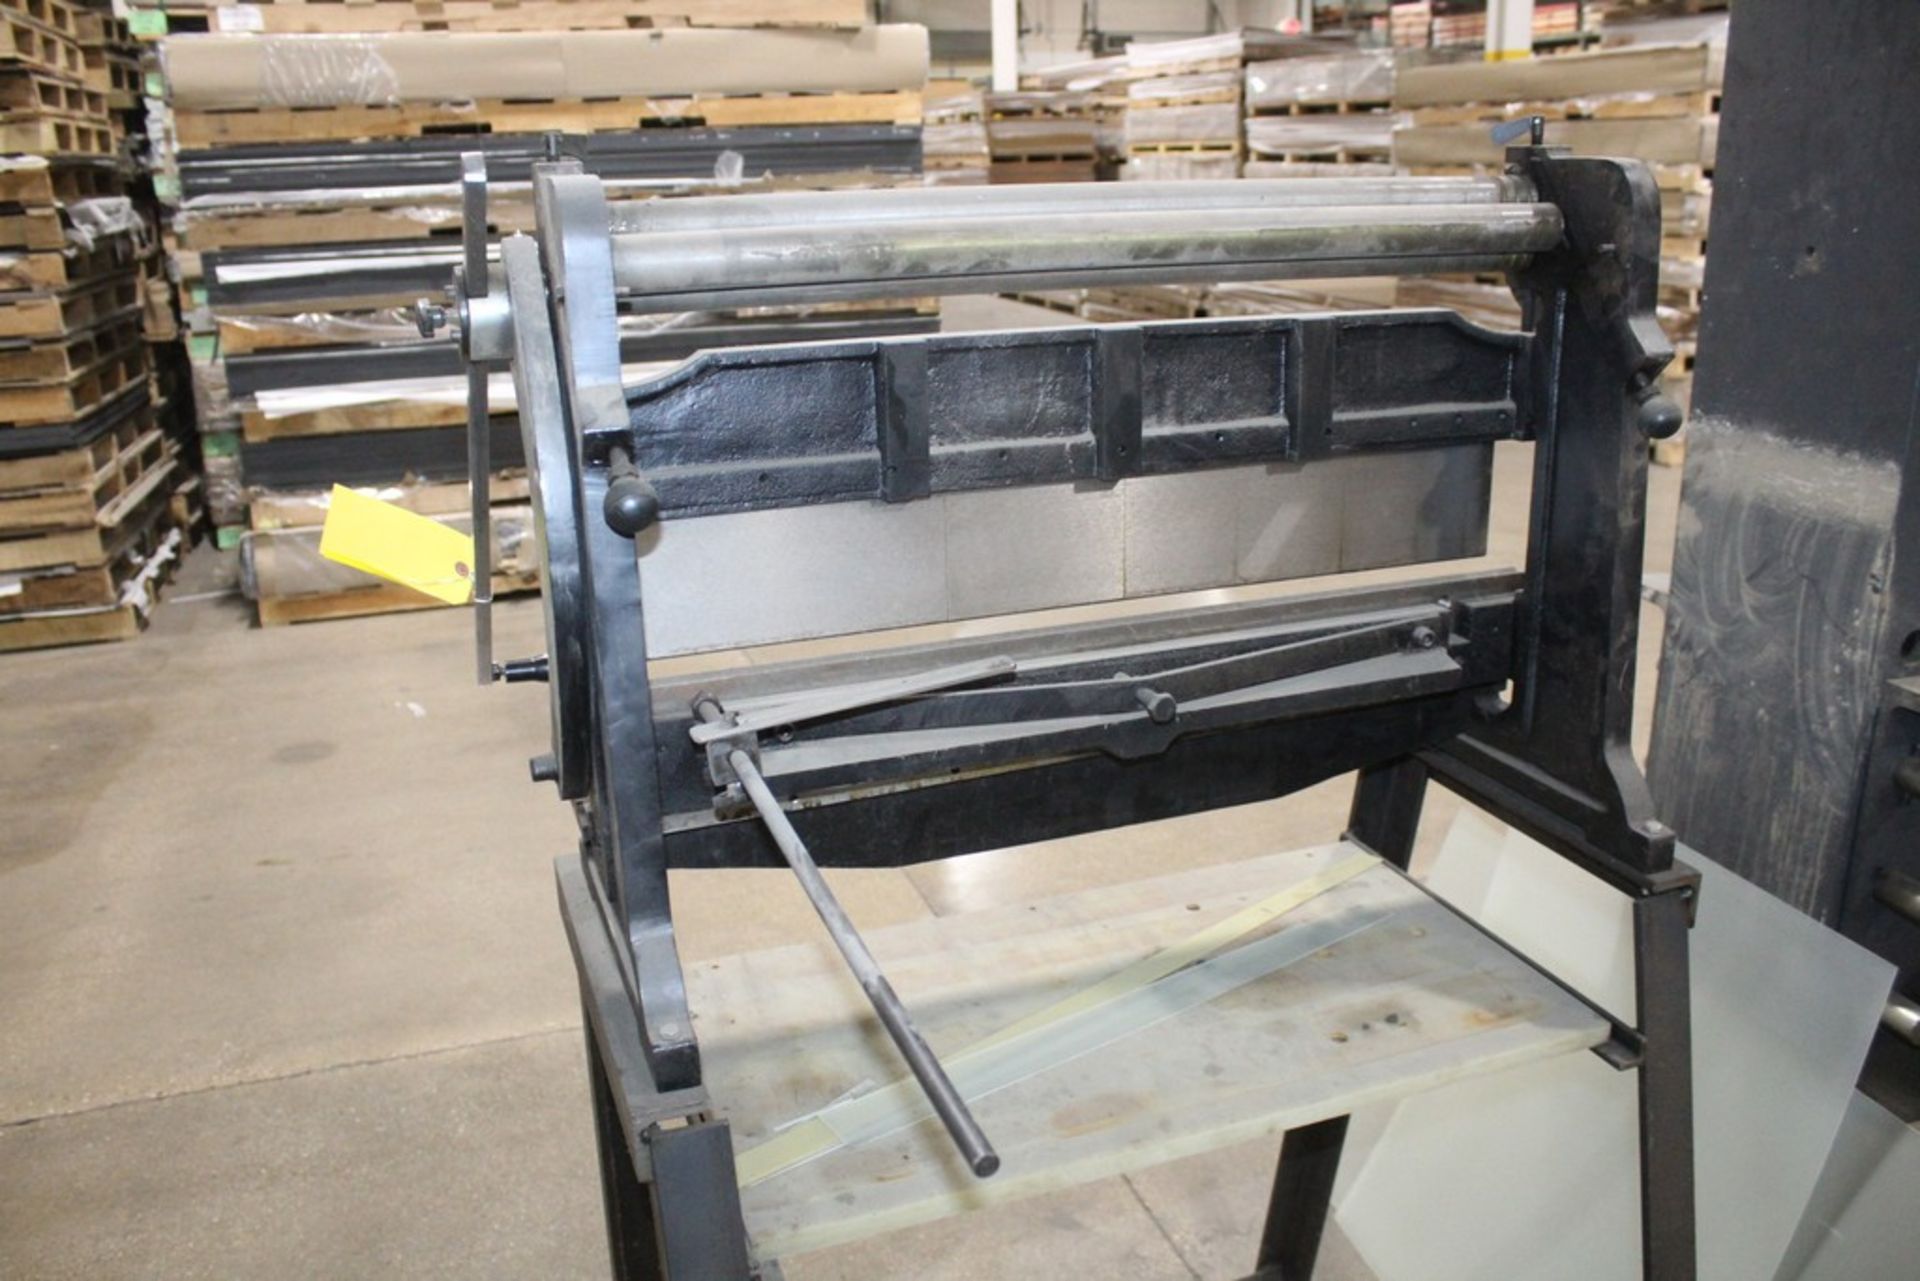 30" MANUAL PRESS BRAKE AND SHEET METAL ROLLER ON STAND LOADING FEE: $75.00 - Image 3 of 3